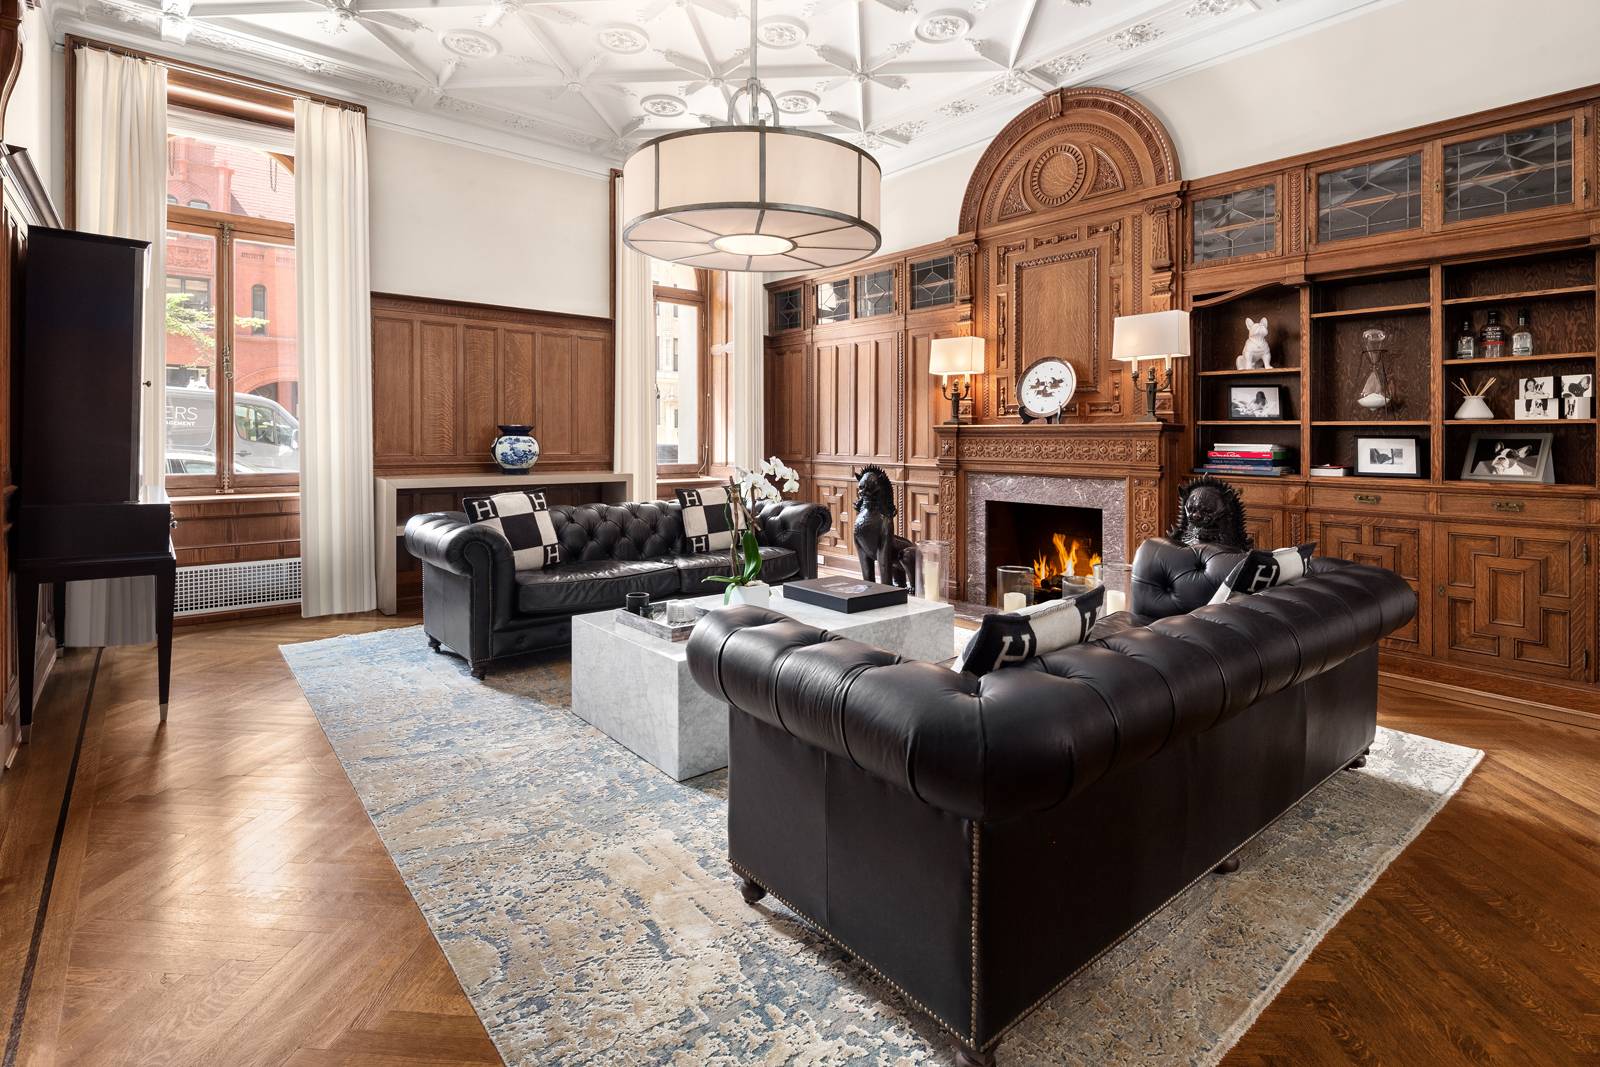 Grand 4 Bedroom Duplex at the Storied Apthorp